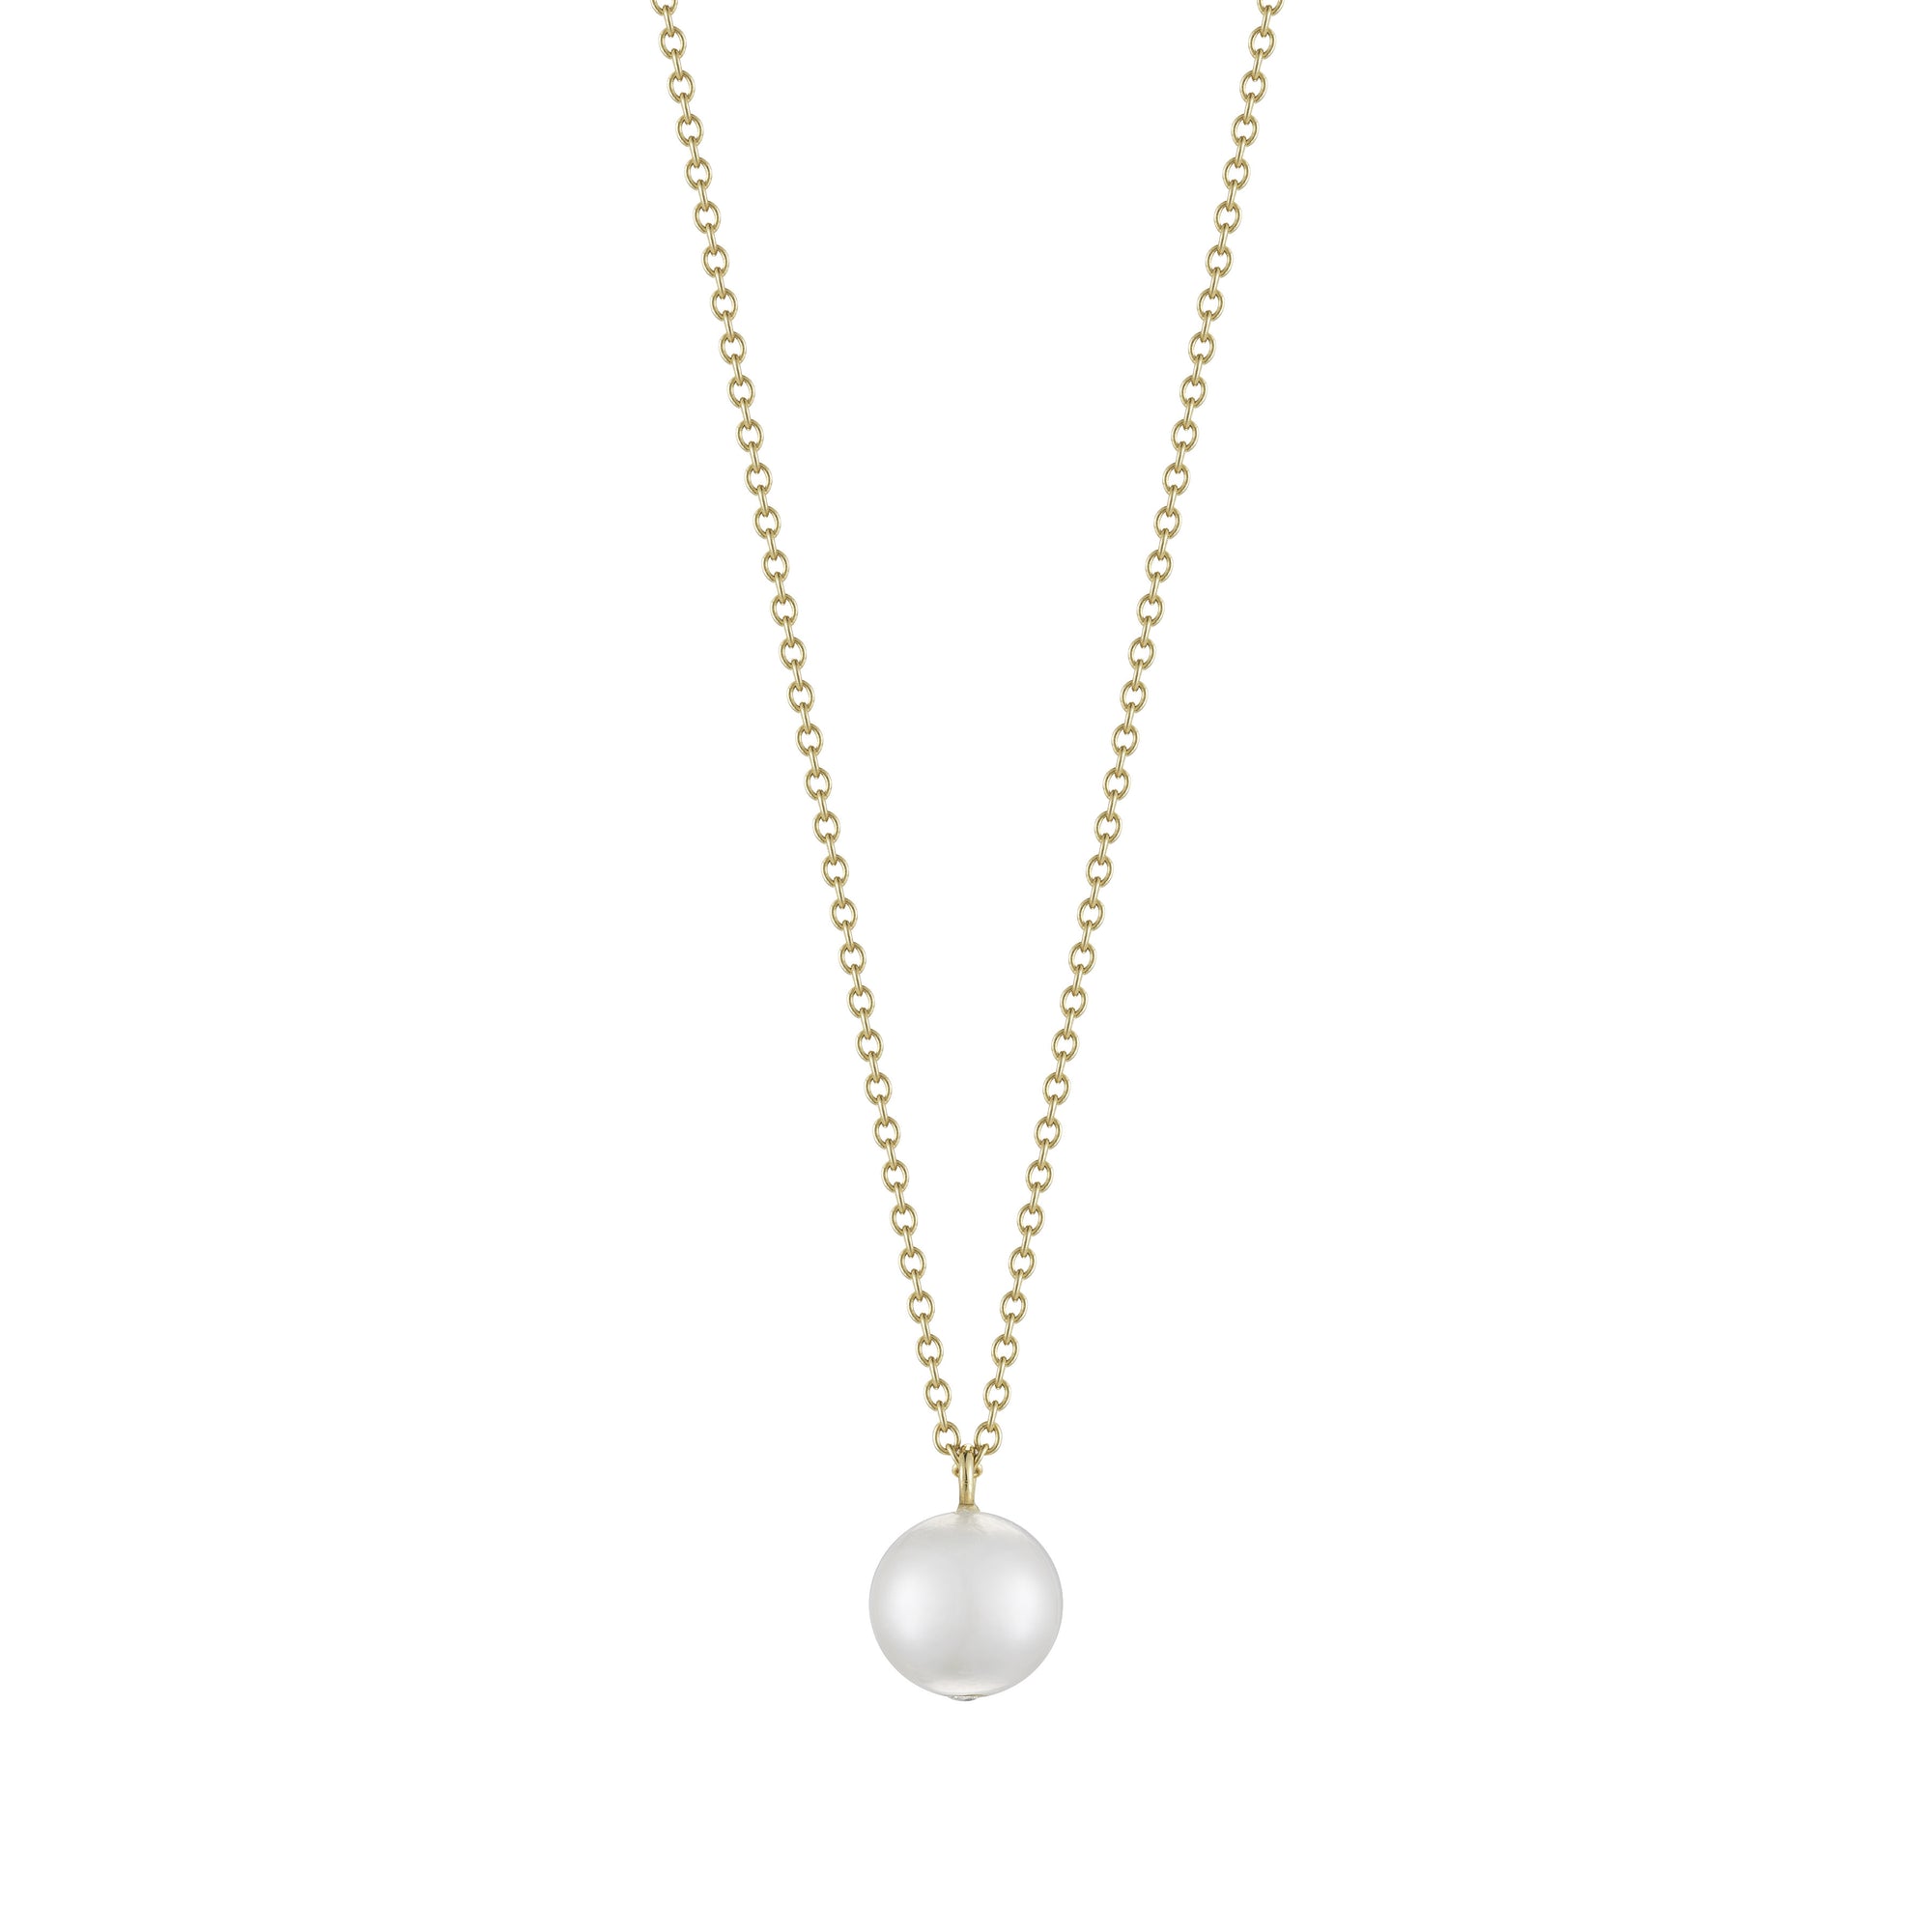 Petite pearl pendant necklace on 18k gold chain by finn by candice pool neistat